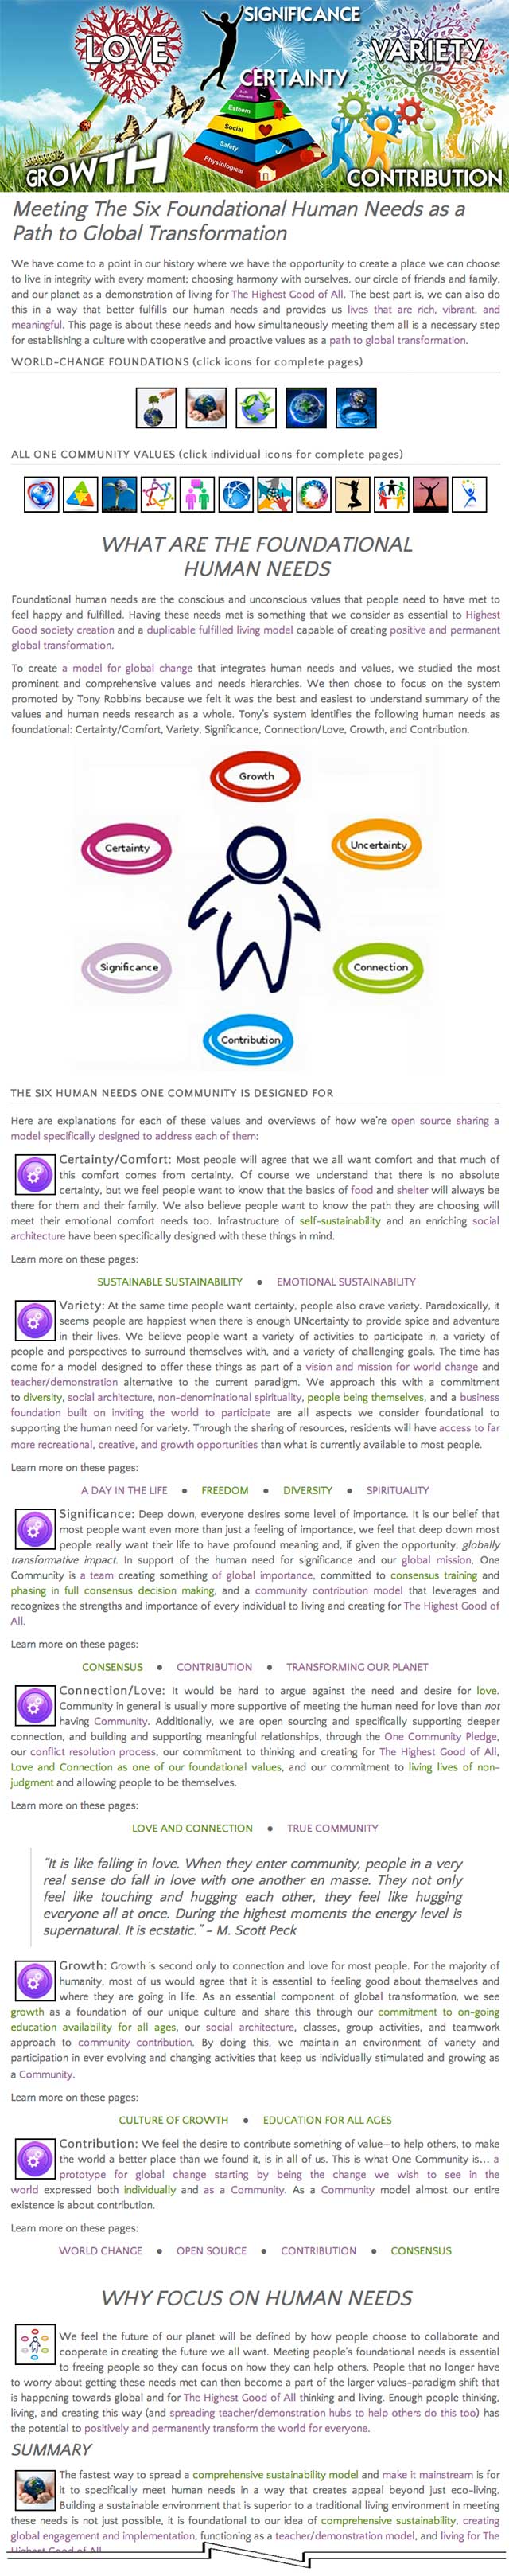 Foundations of Fulfillment page, One Community